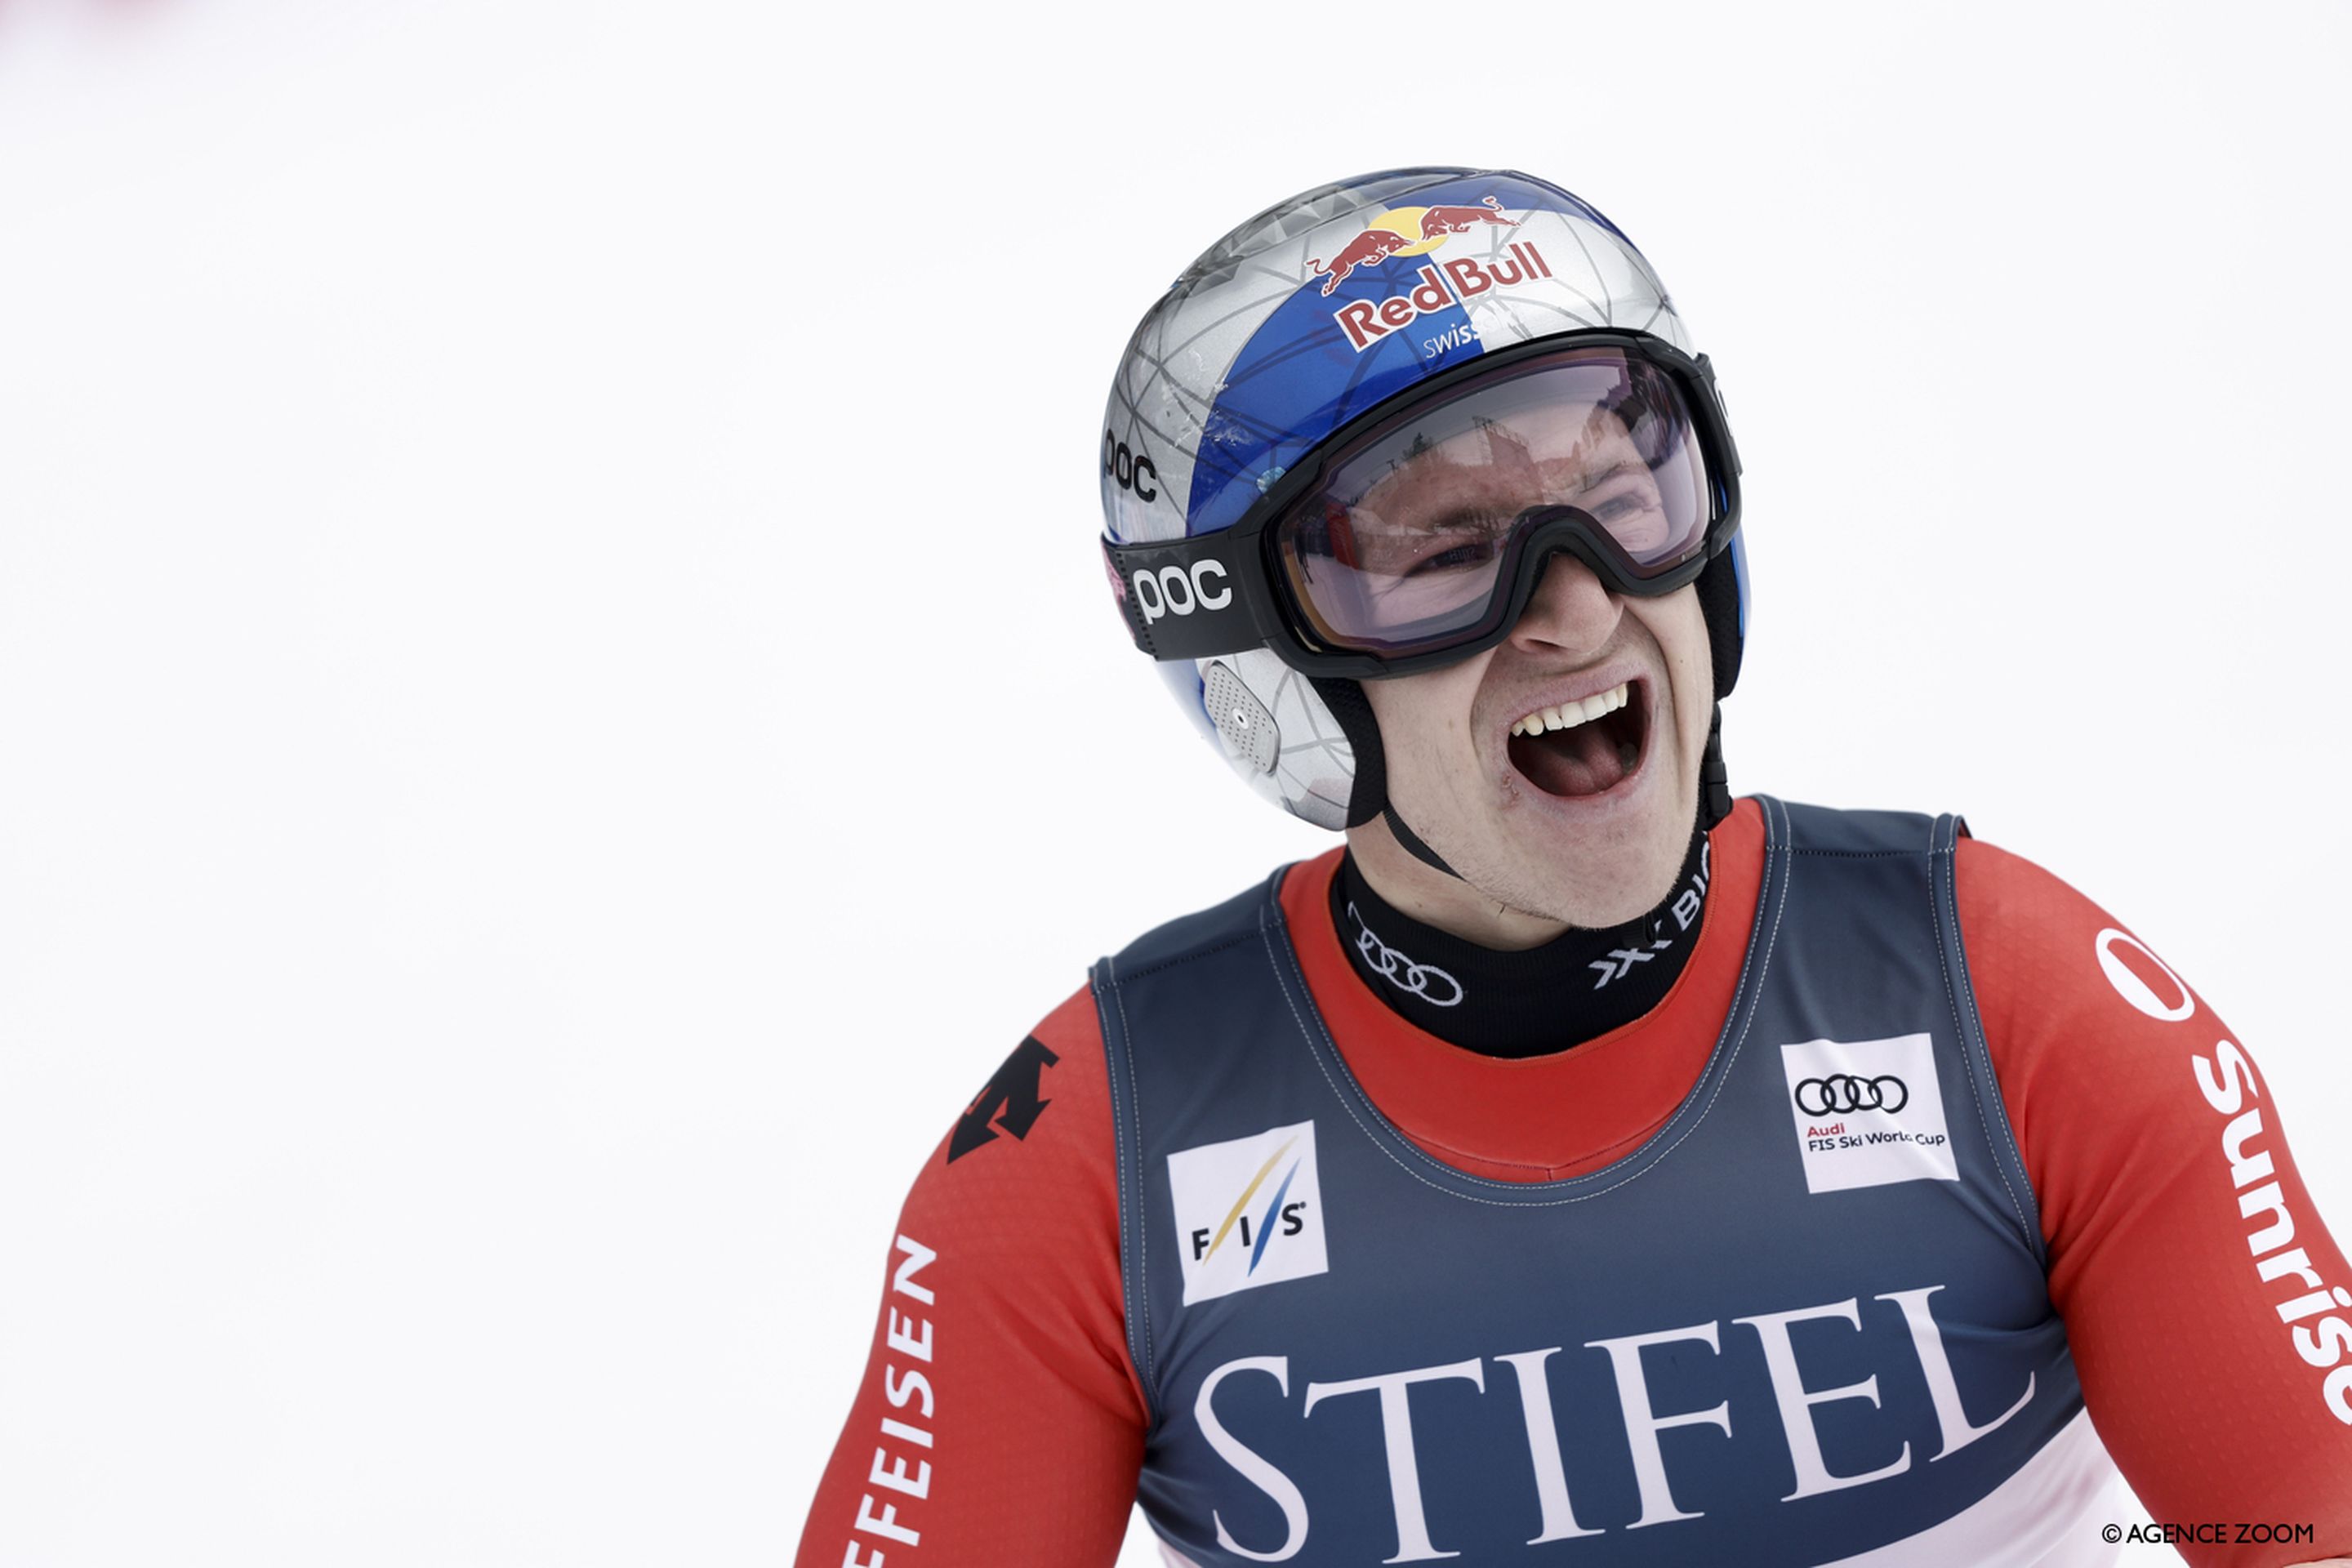 Marco Odermatt (SUI) finishes third and is still chasing his first World Cup downhill win (Agence Zoom).